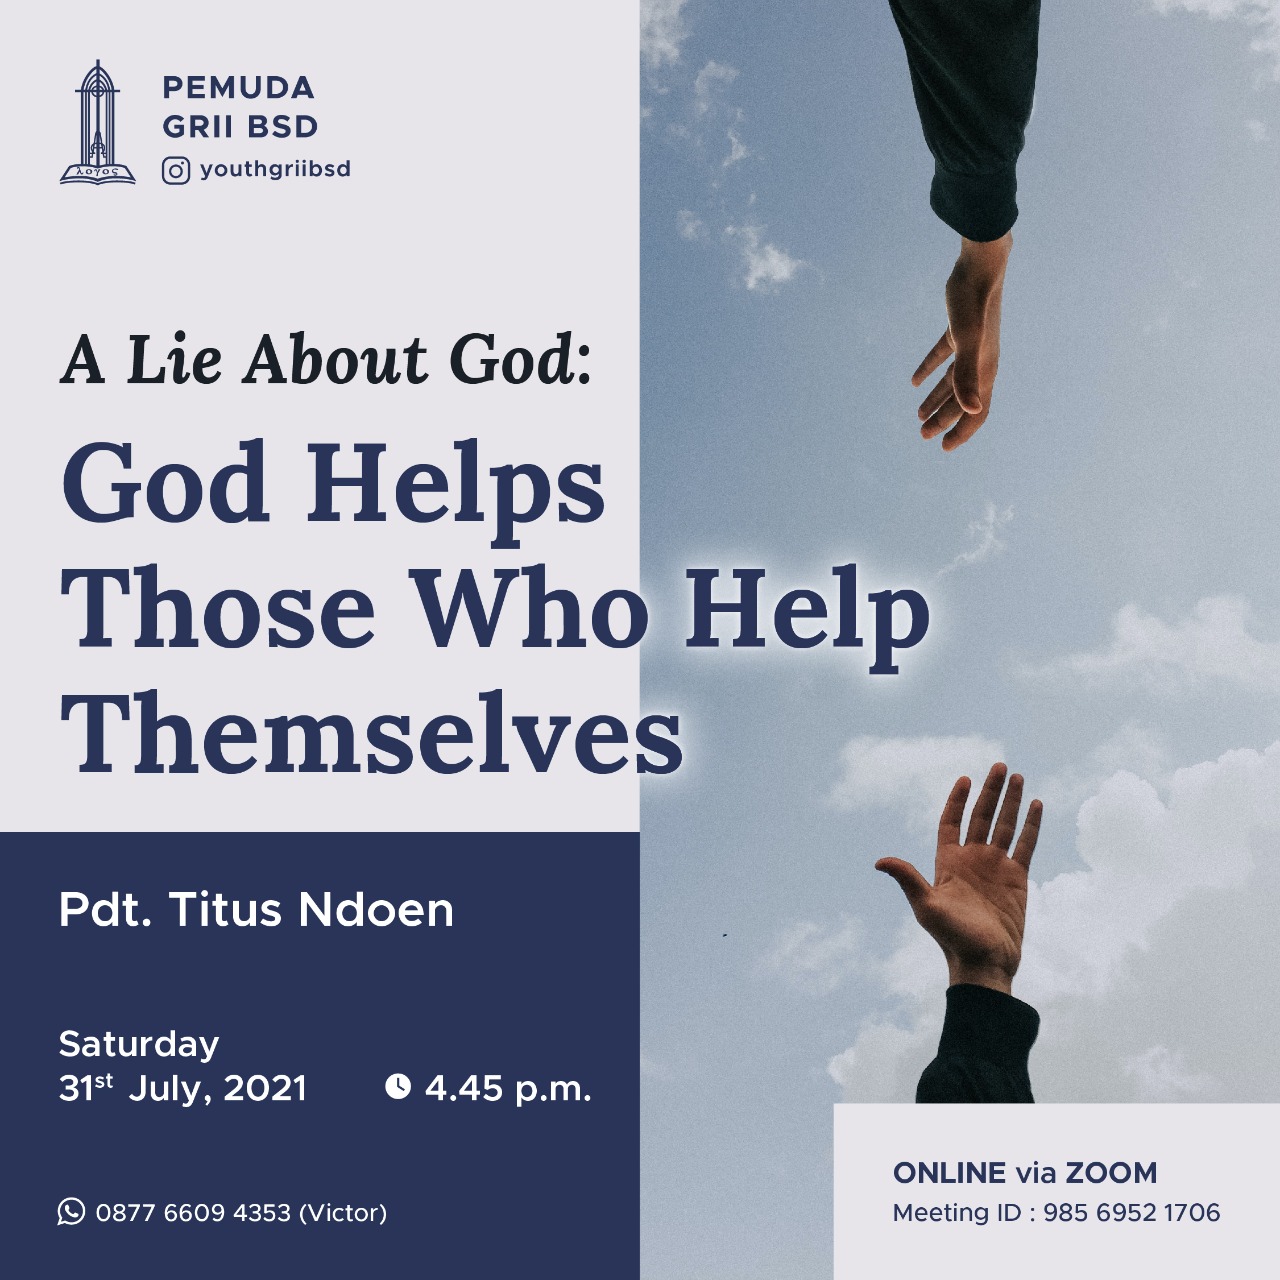 A Lie About God: God Helps Those Who Help Themselves